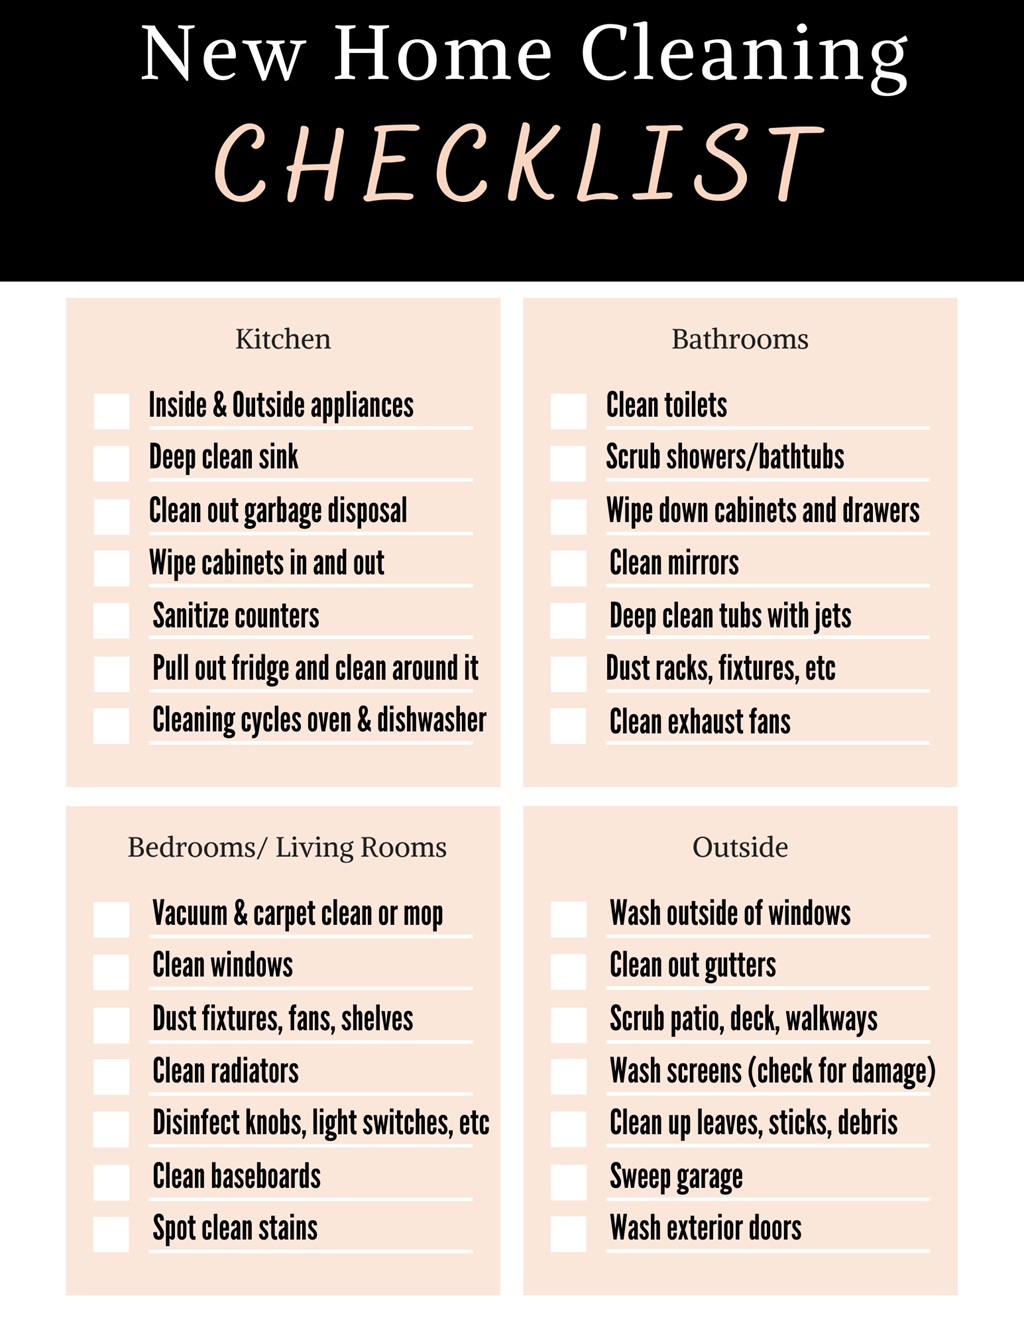 Top To Bottom New Construction Home Cleaning Checklist